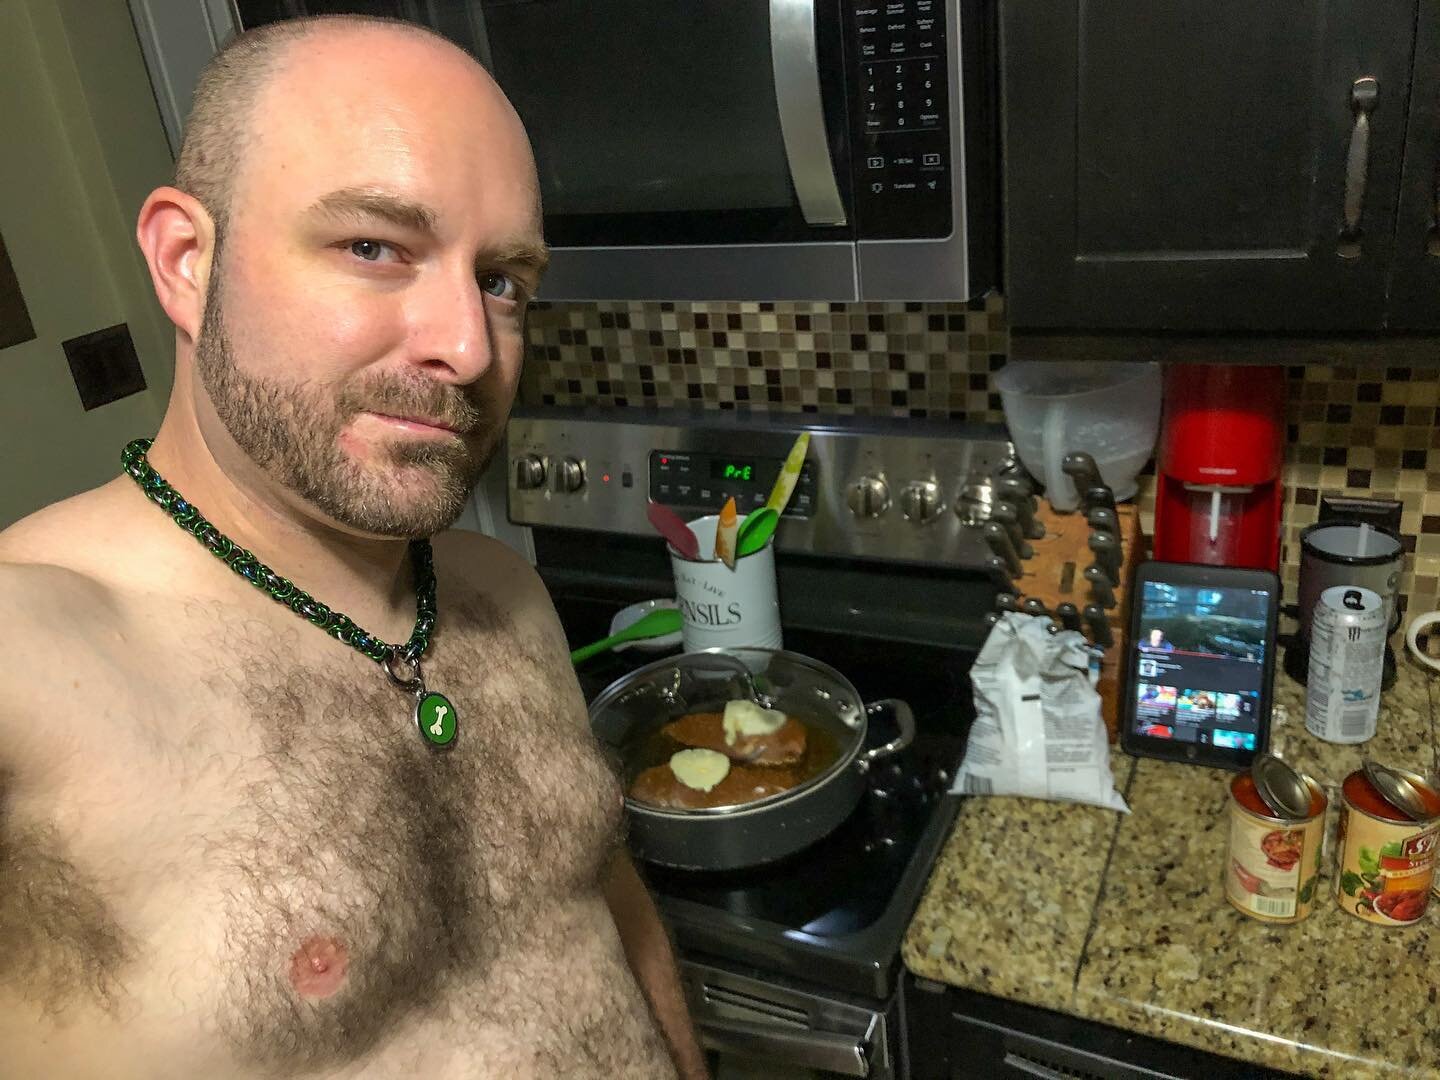 Cookin dinner &amp; watchin YouTube after a fun stream this evening 😋🐾
#farrstrider #chesthair #pup